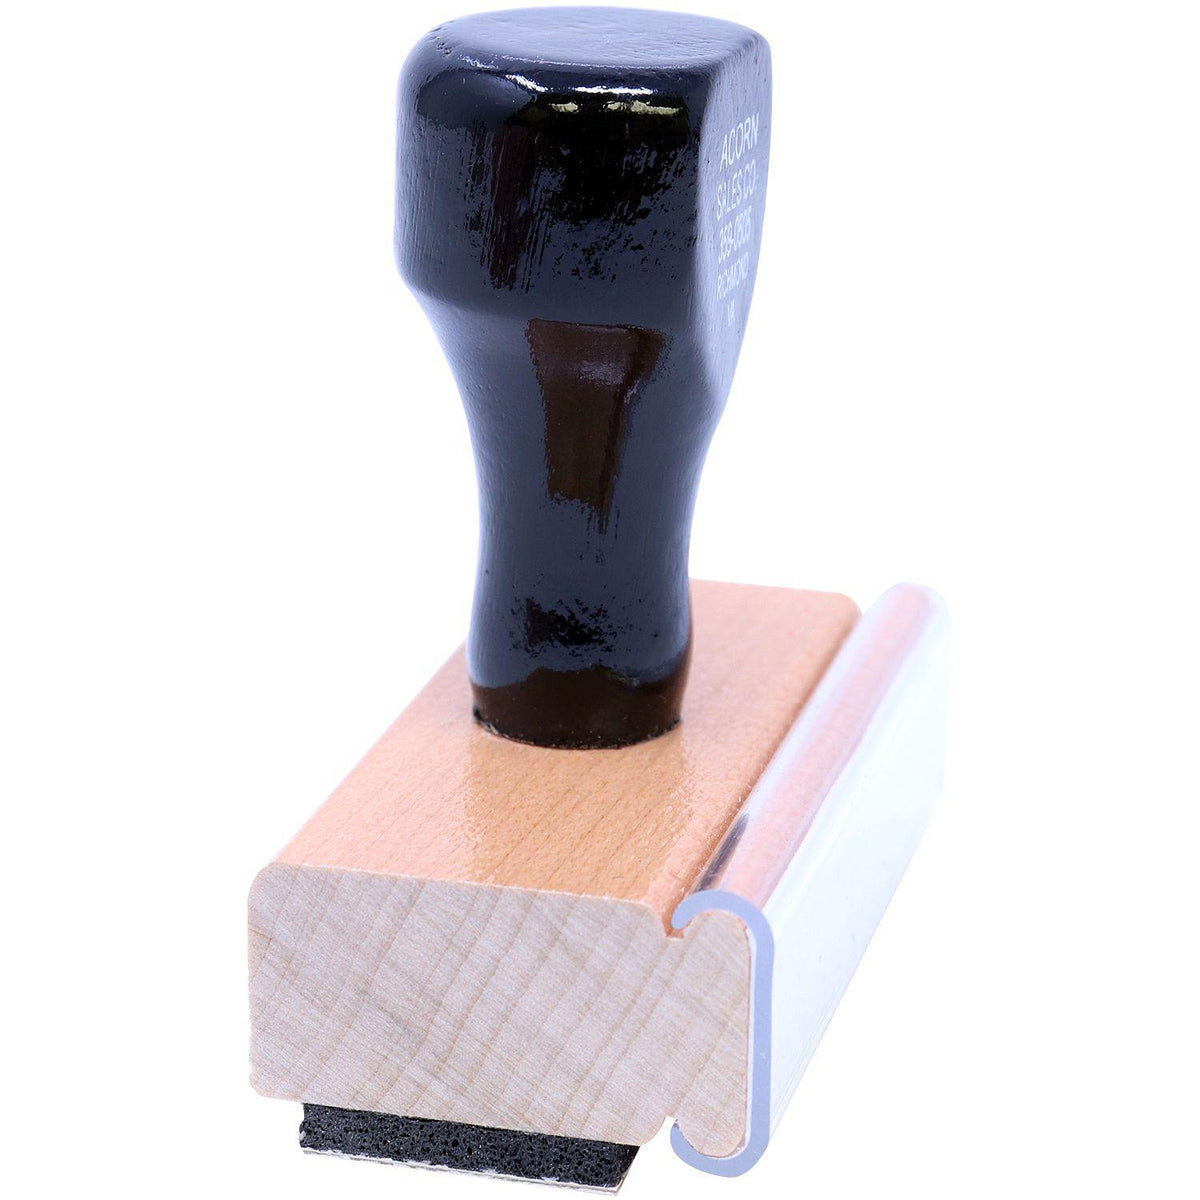 Side View of Temporarily Closed Rubber Stamp at an Angle